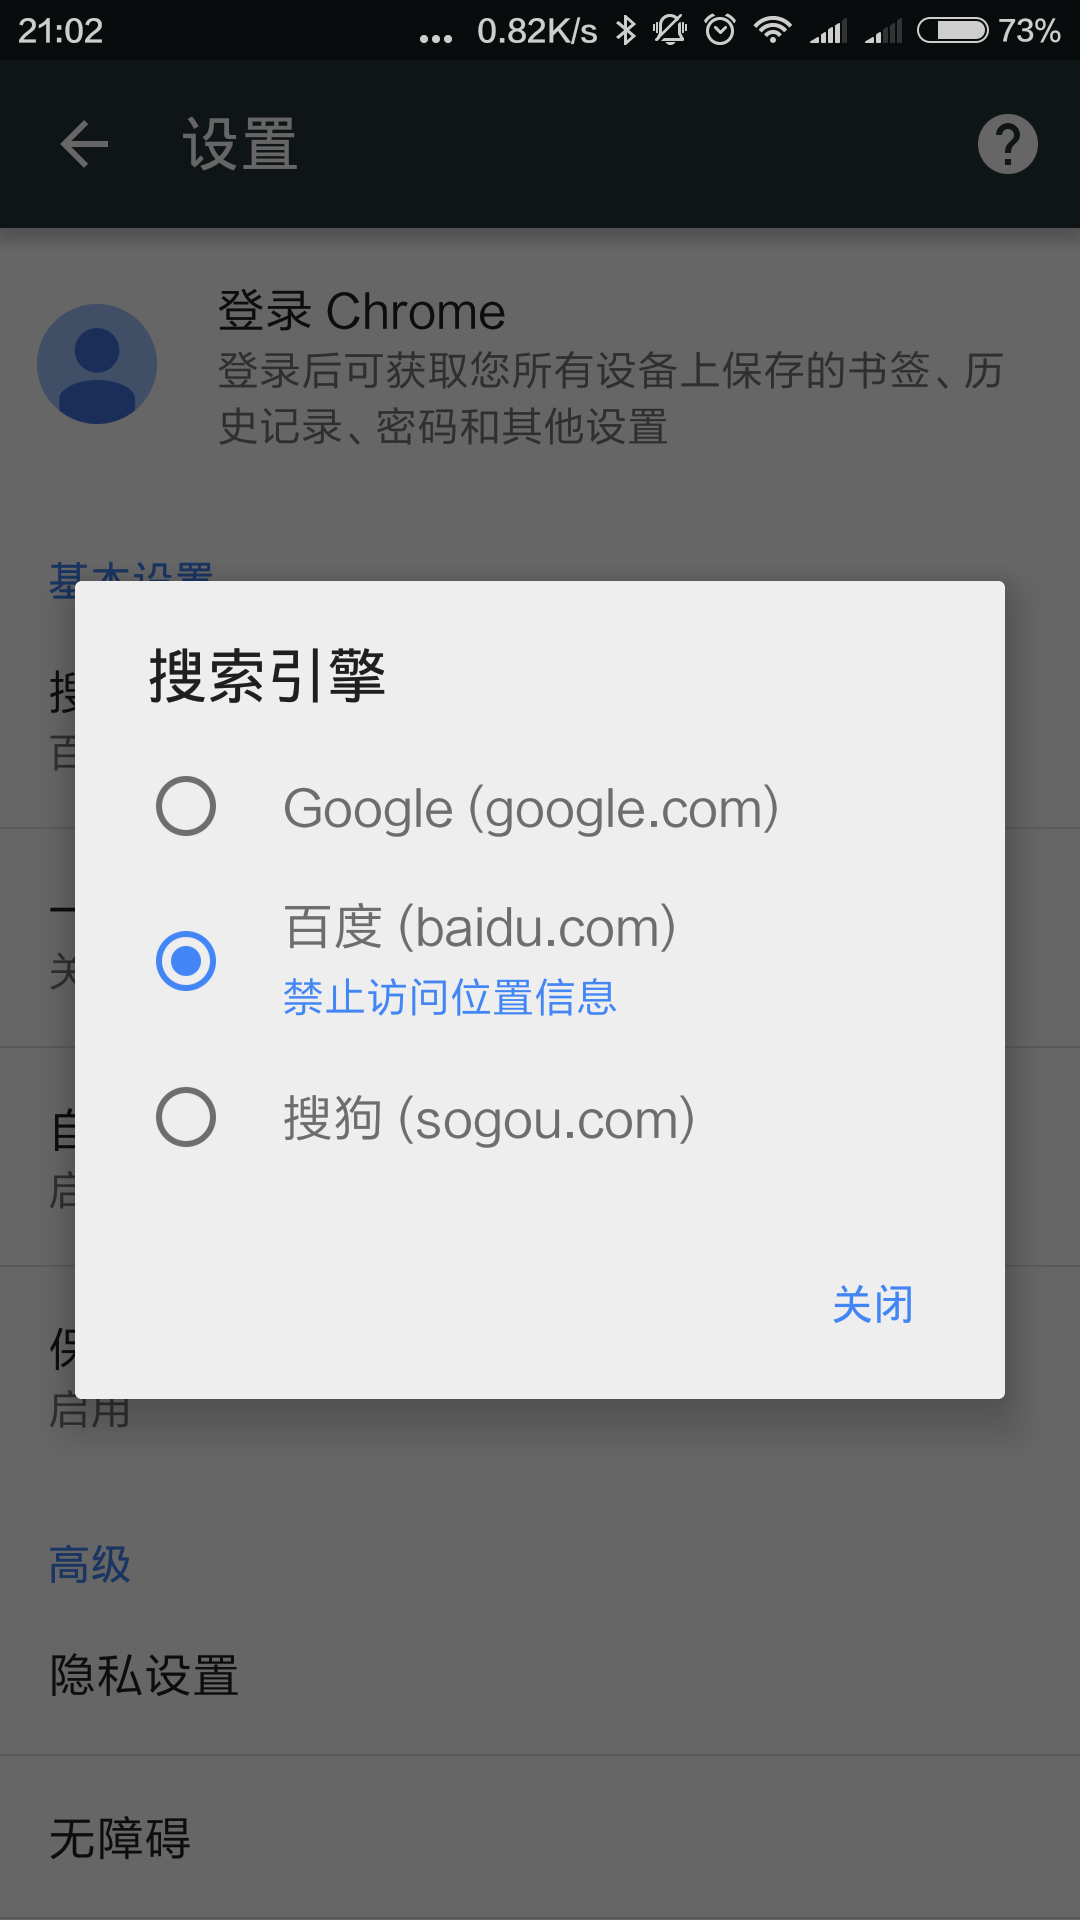 chrome for android如何自定义搜索引擎? - 匿名